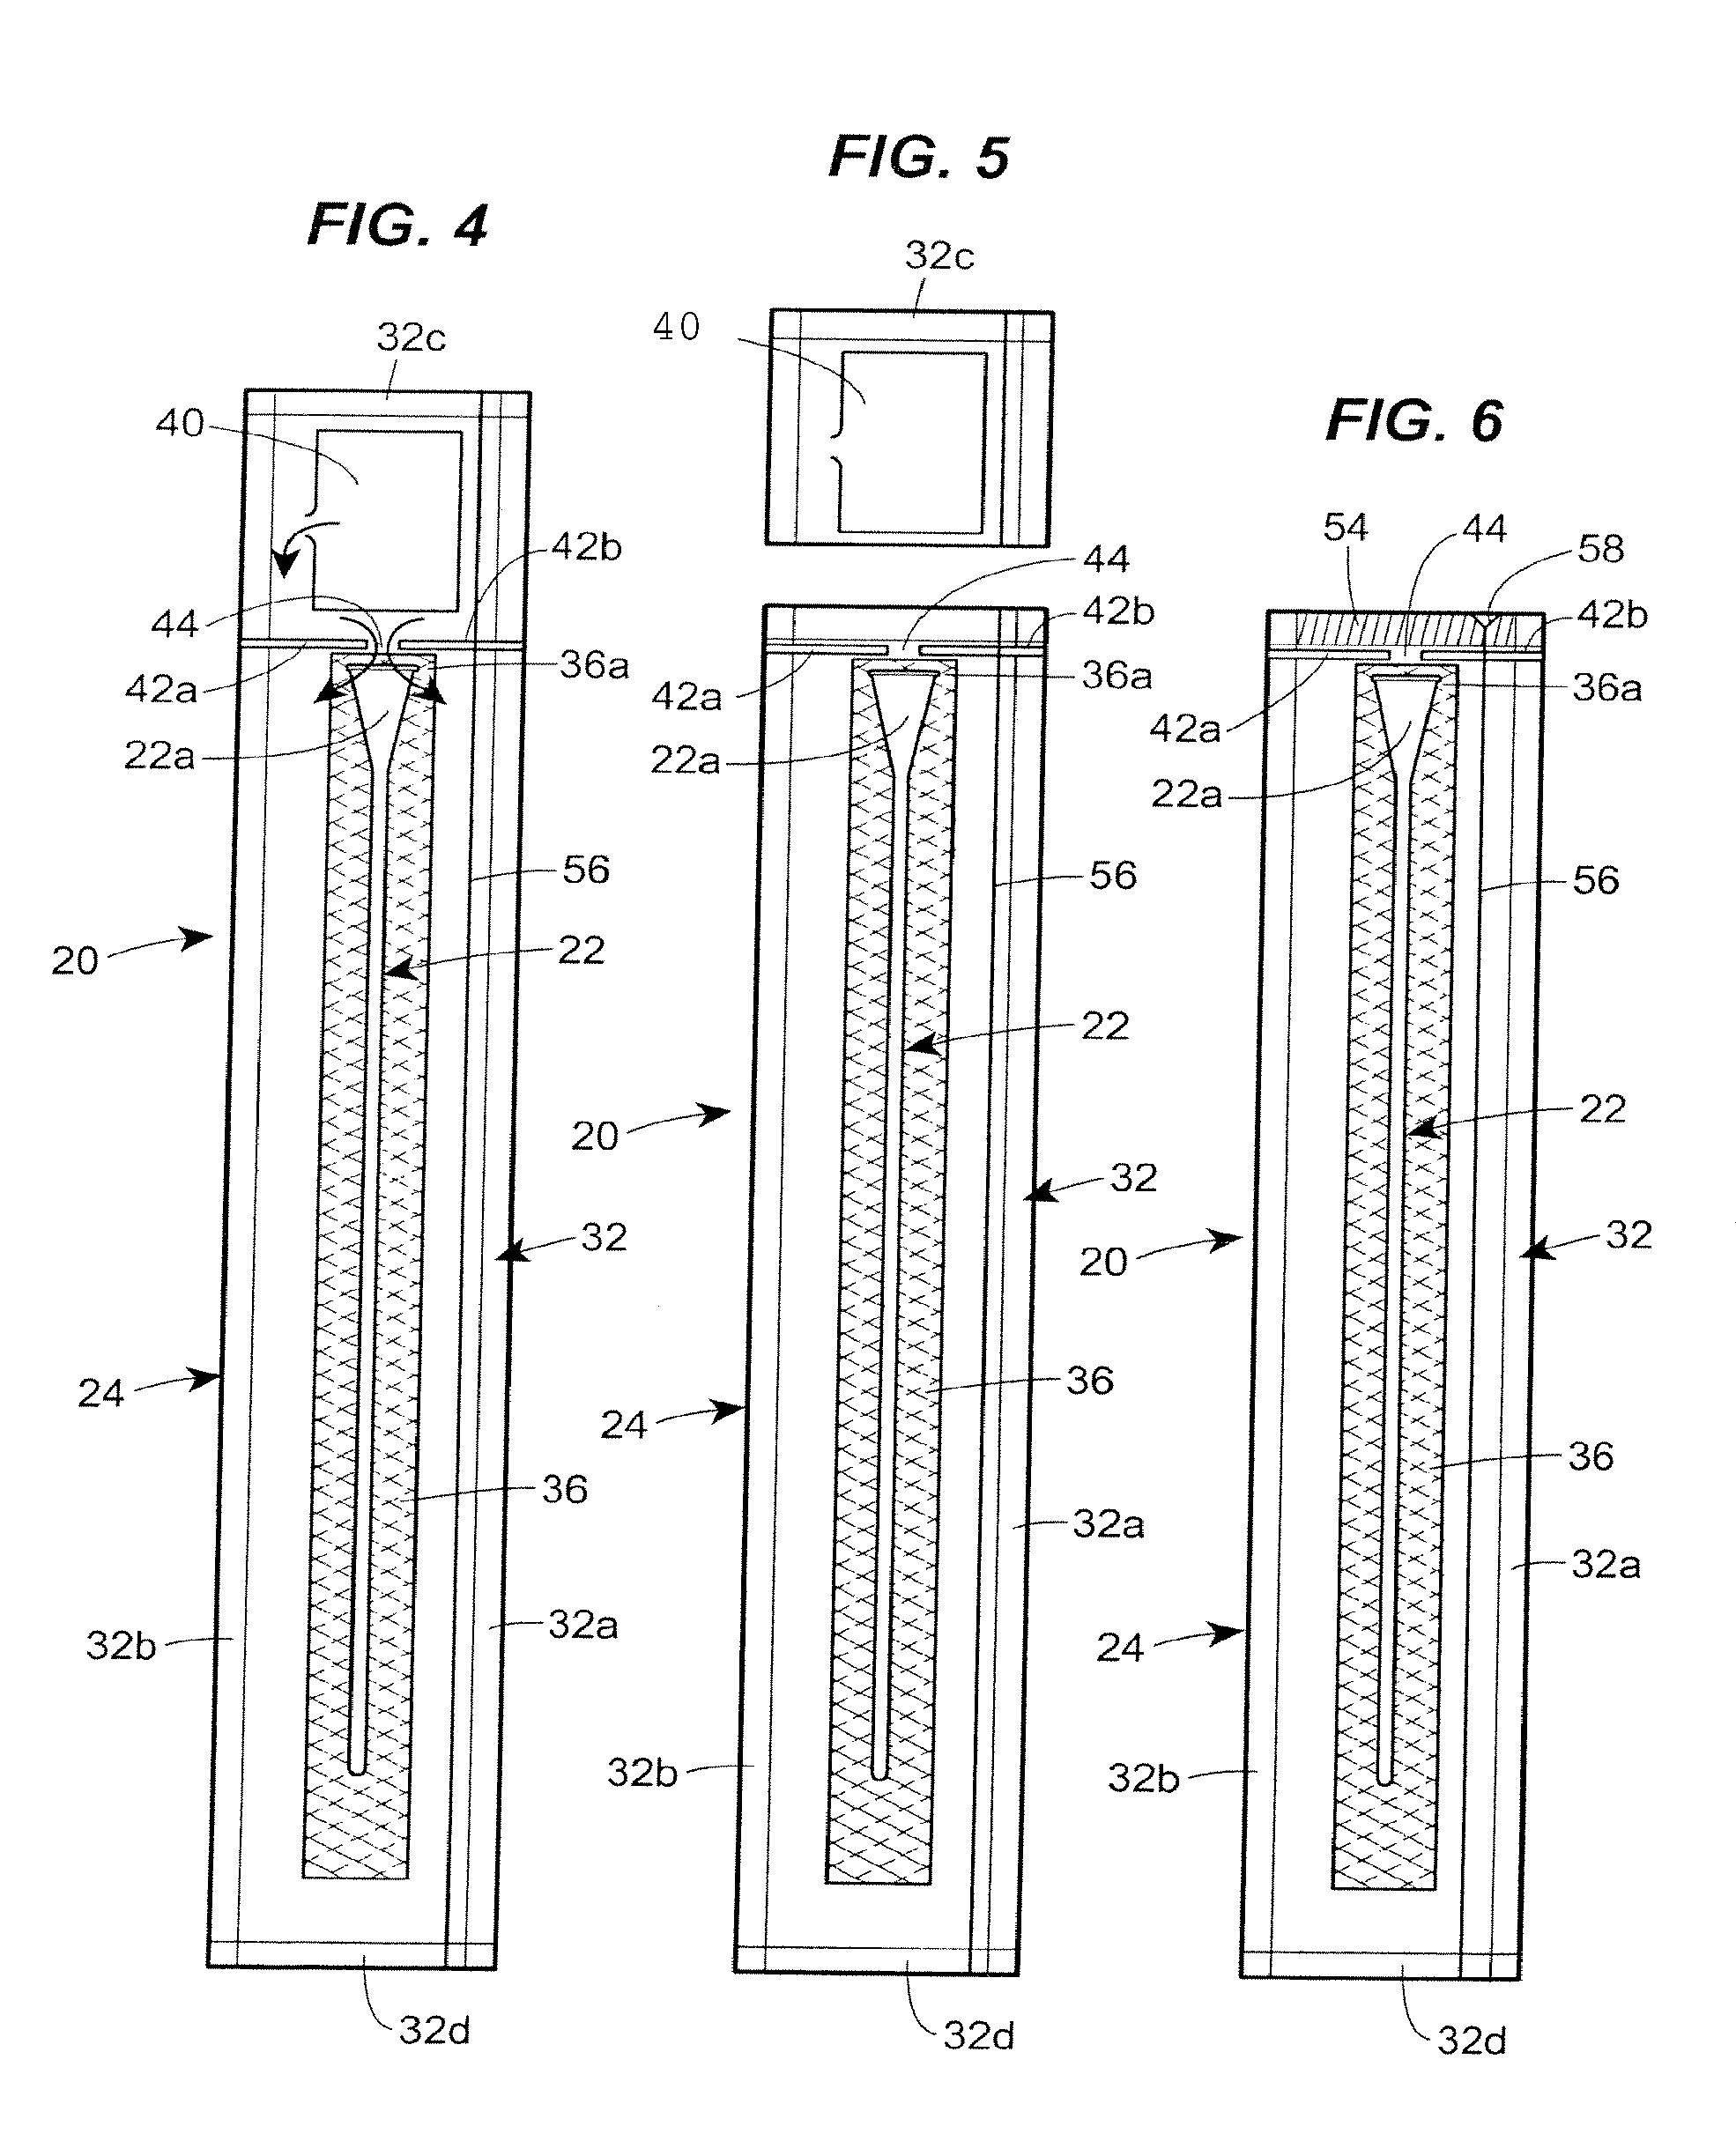 Vapor hydrated catheter assembly and method of making same